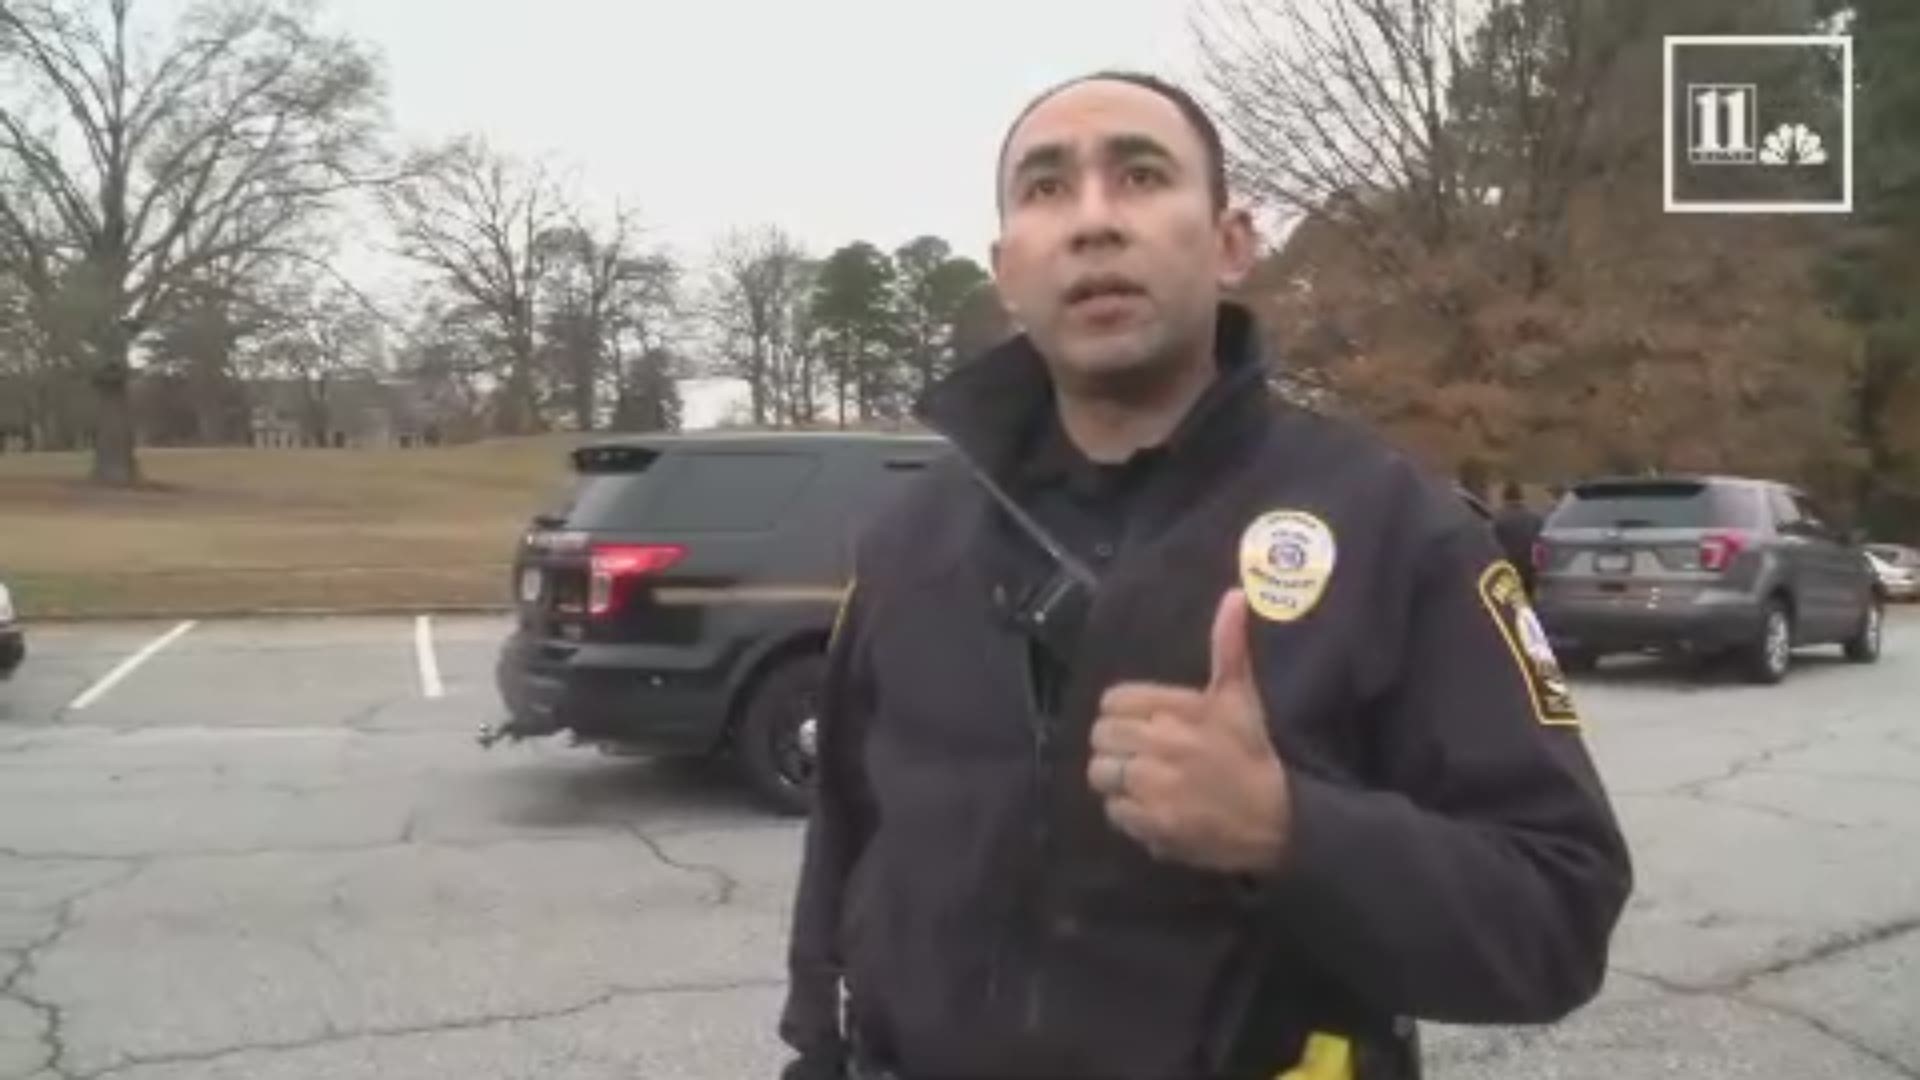 Brookhaven Police Department said the threat to Montgomery Elementary School was called in at around 7:20 a.m. Officer Carlos Nino said he and his partner arrived at the school for an event and learned about the threat. That's when the school went on a level two lockdown and the DeKalb County bomb squad was called.